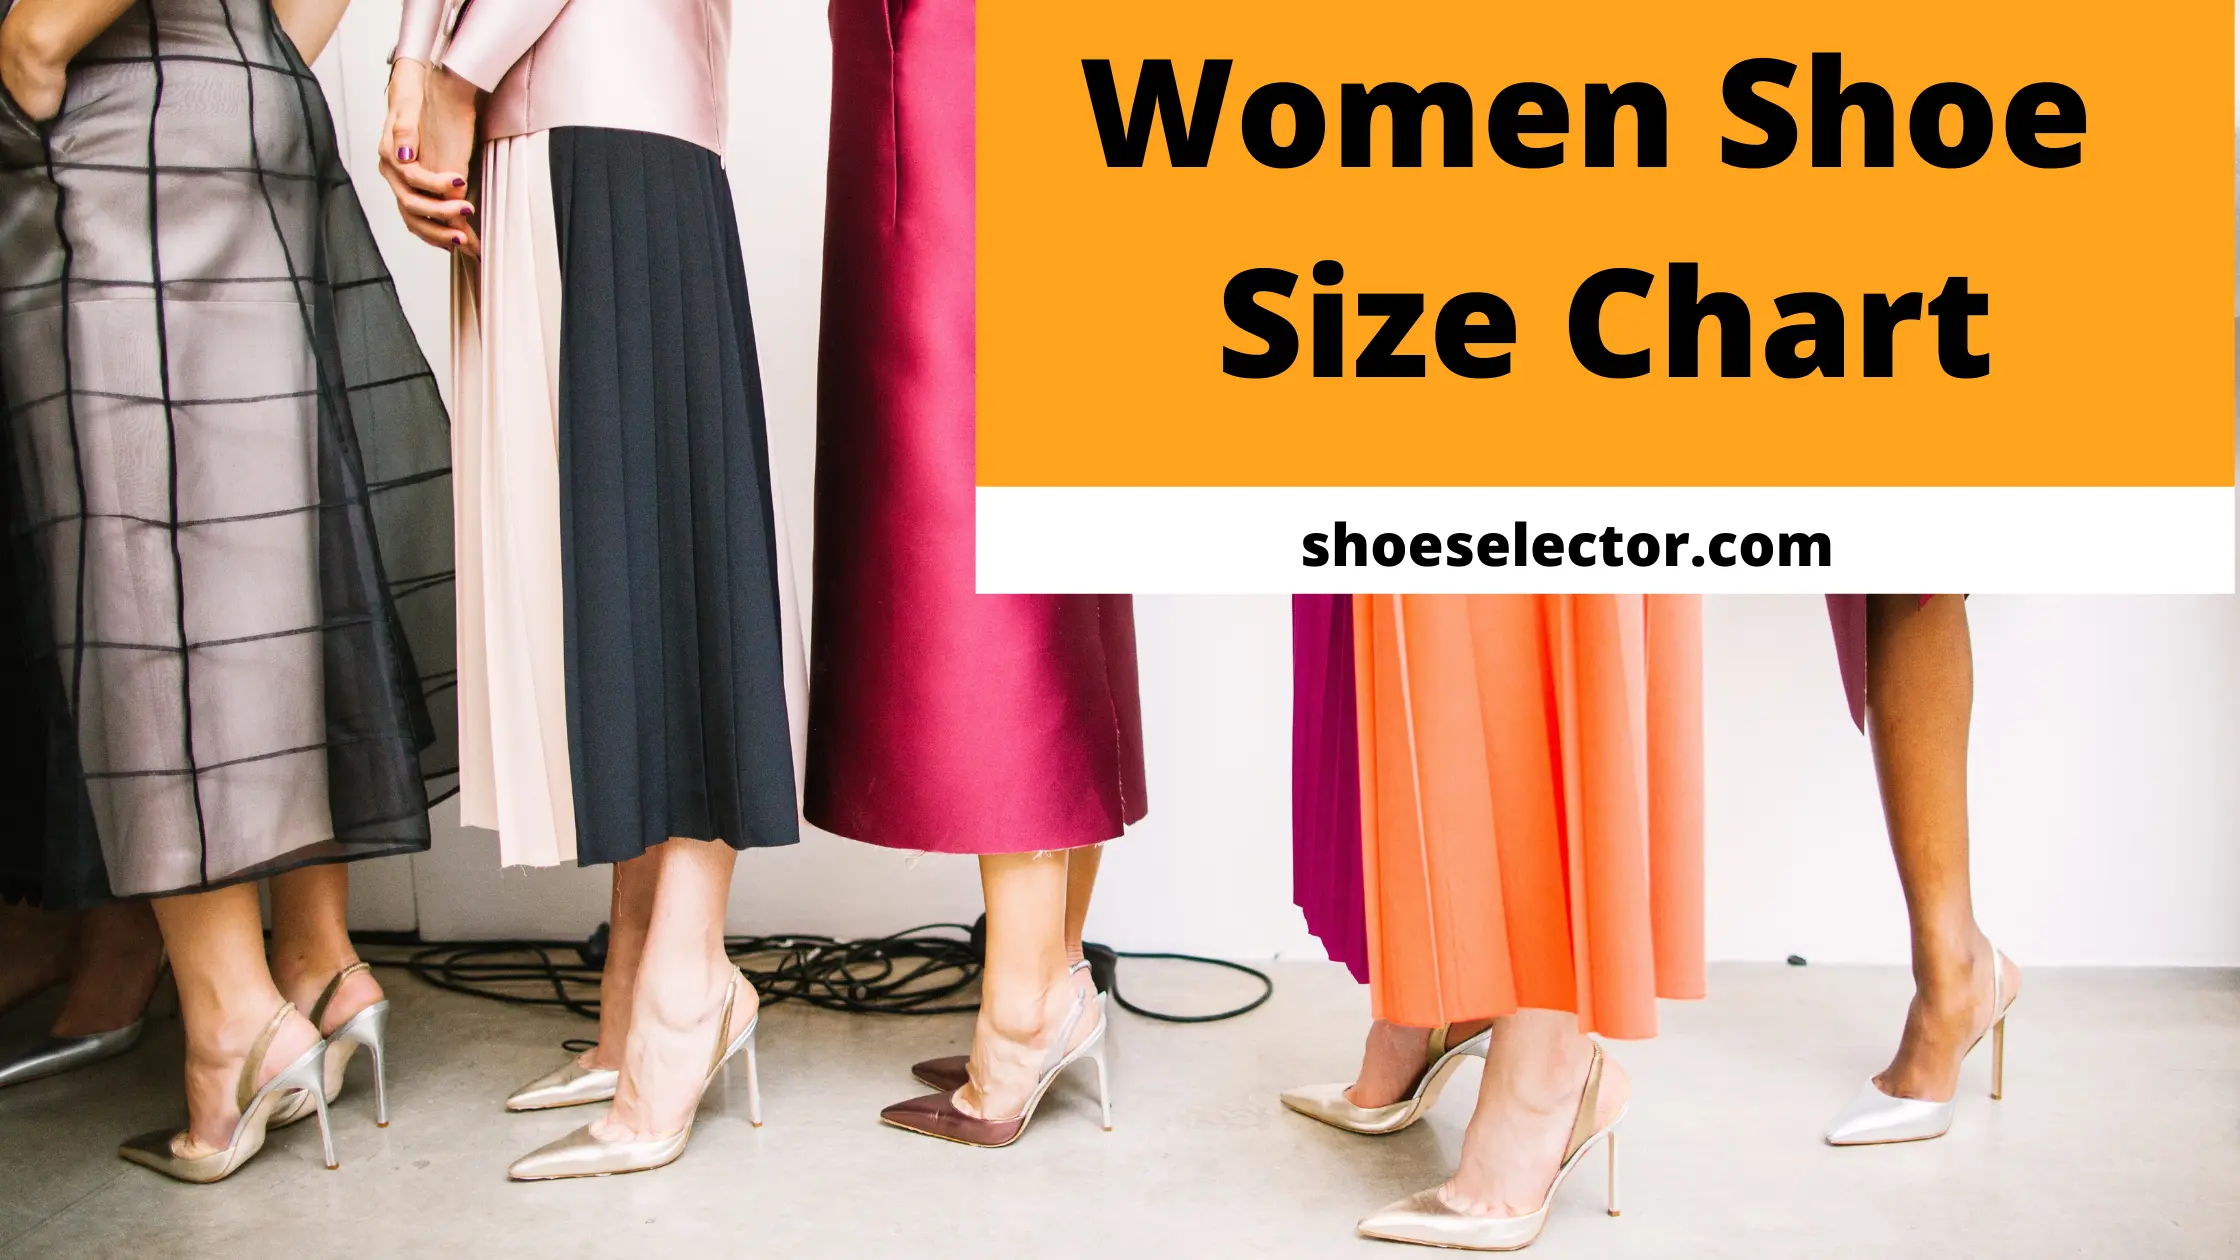 Women's Shoe Size Chart - The Essential Guide